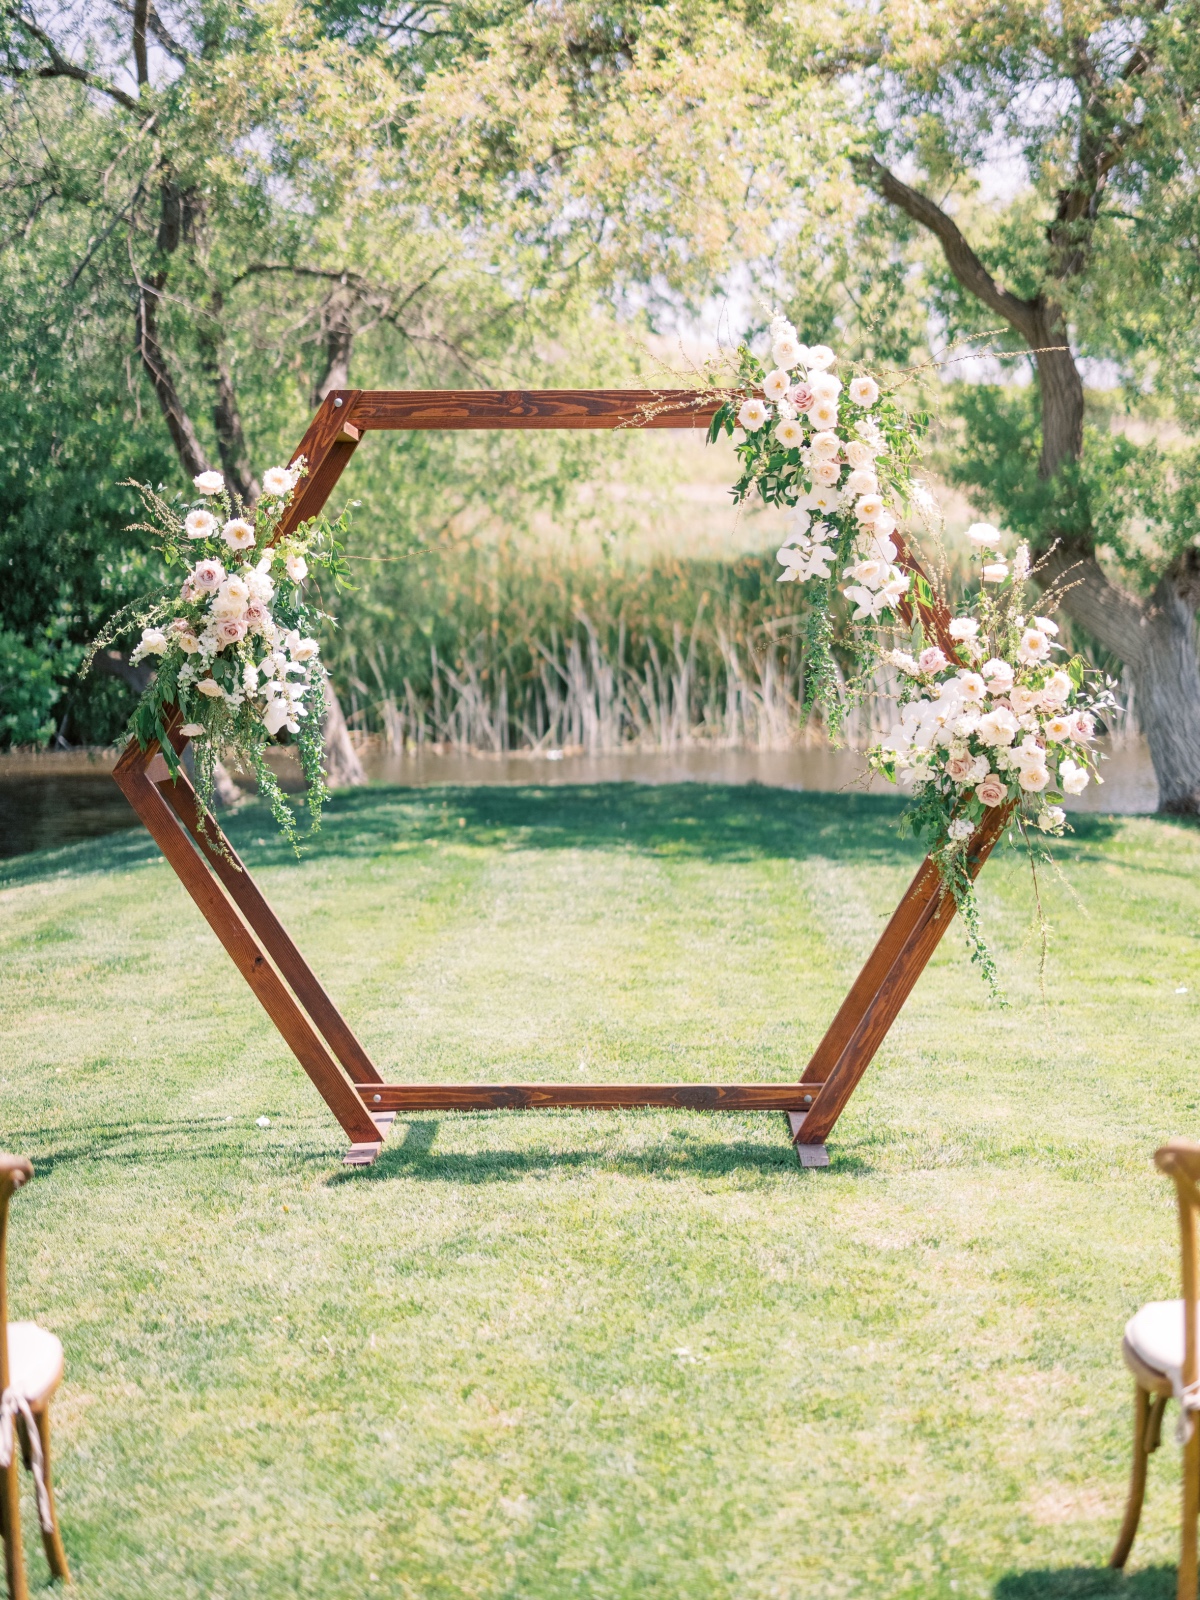 This Cali Vineyard Wedding Has The Most Romantic First-Look Location We've Ever Seen